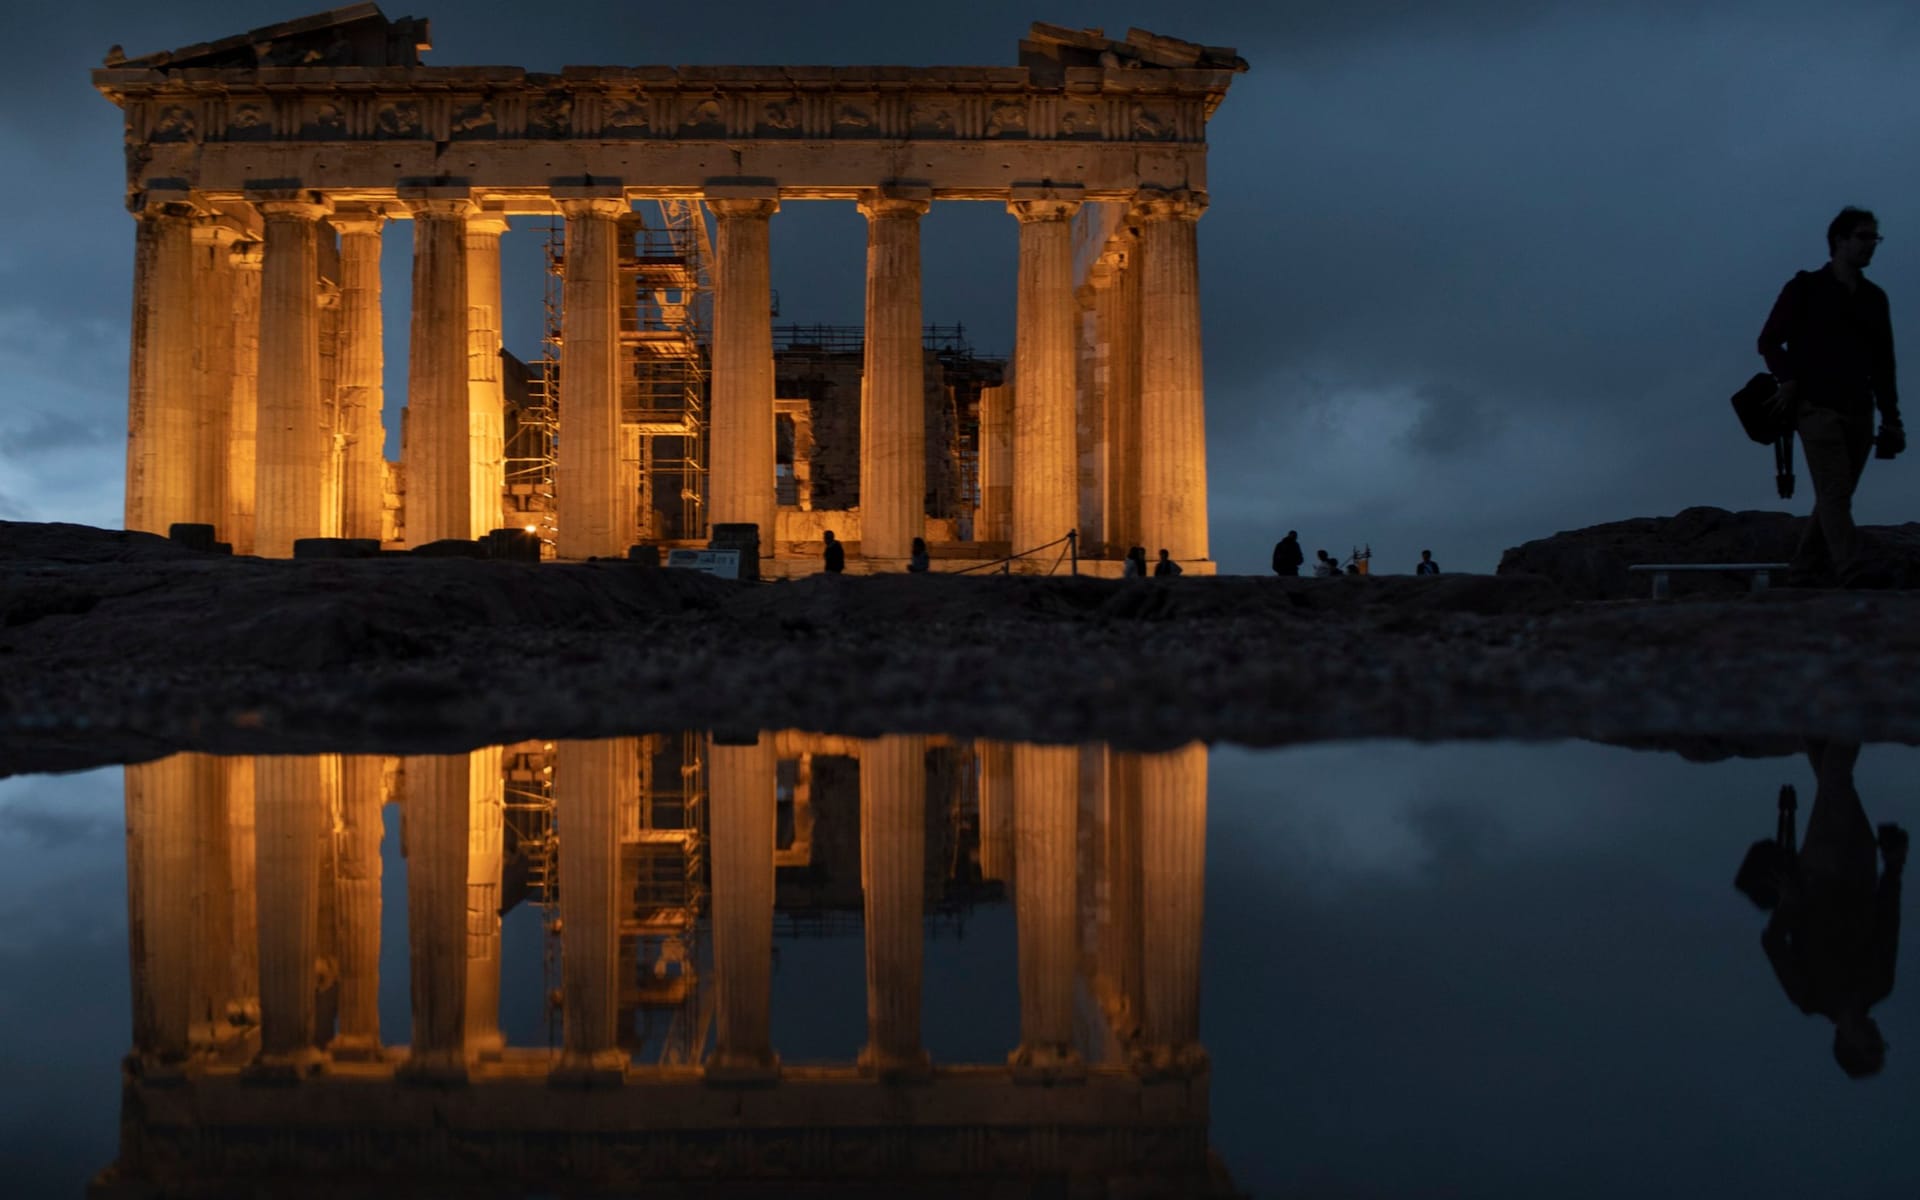 Greece’s Parthenon temple has had the wrong name for centuries, new research by archeologists claims